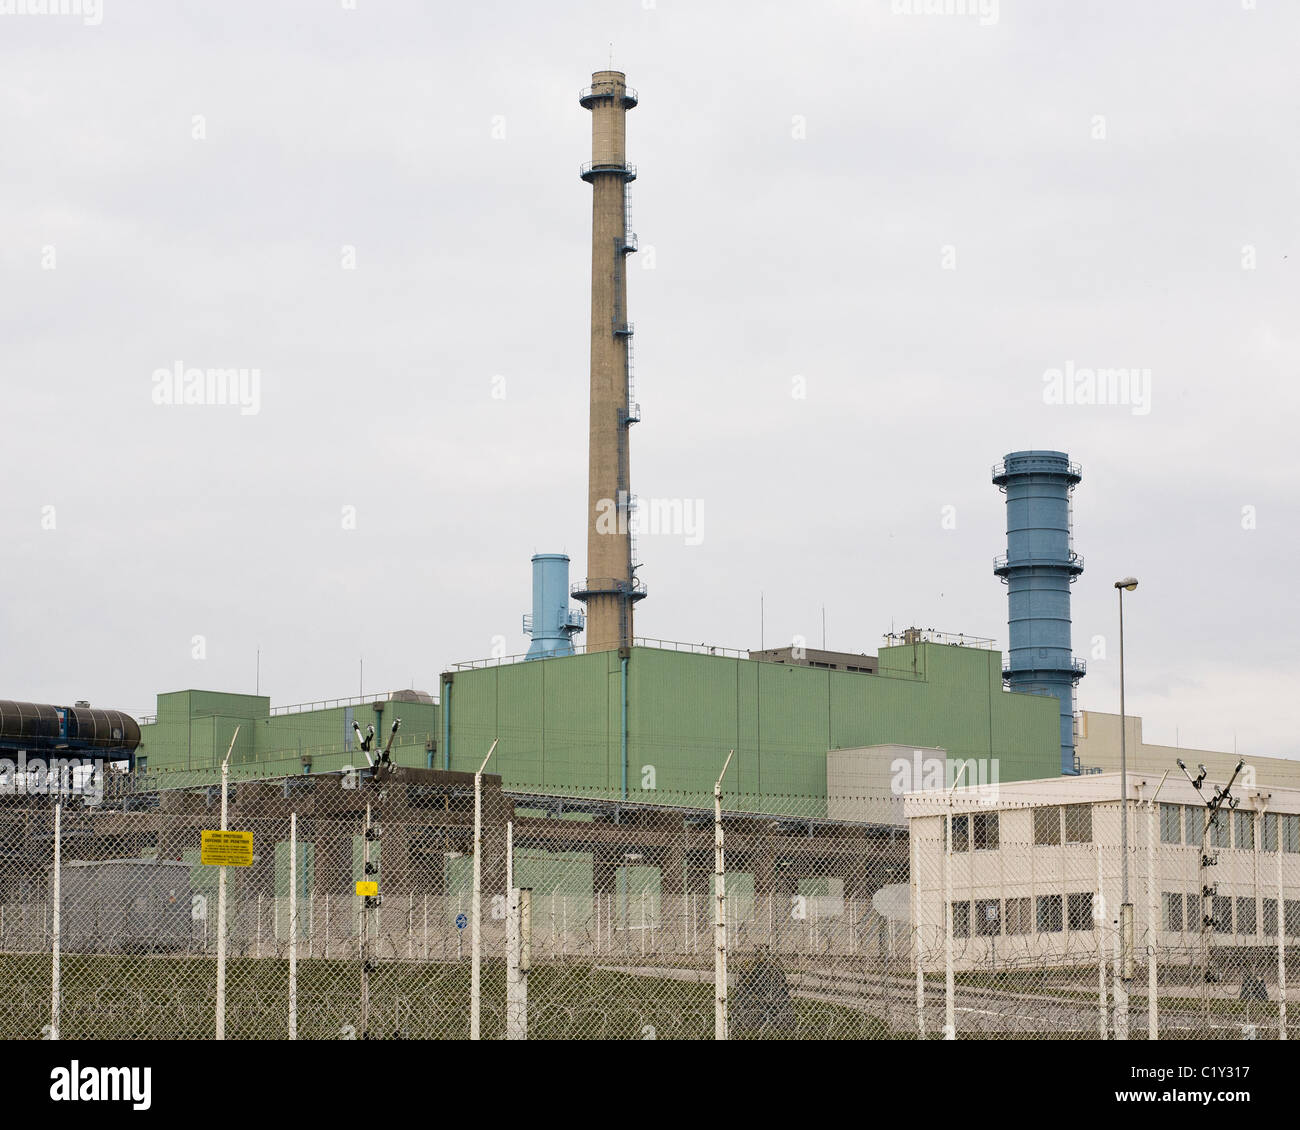 The nuclear fuel recycling plant of  La Hague in Normandy, belonging to the Areva company (previously Cogema) Stock Photo